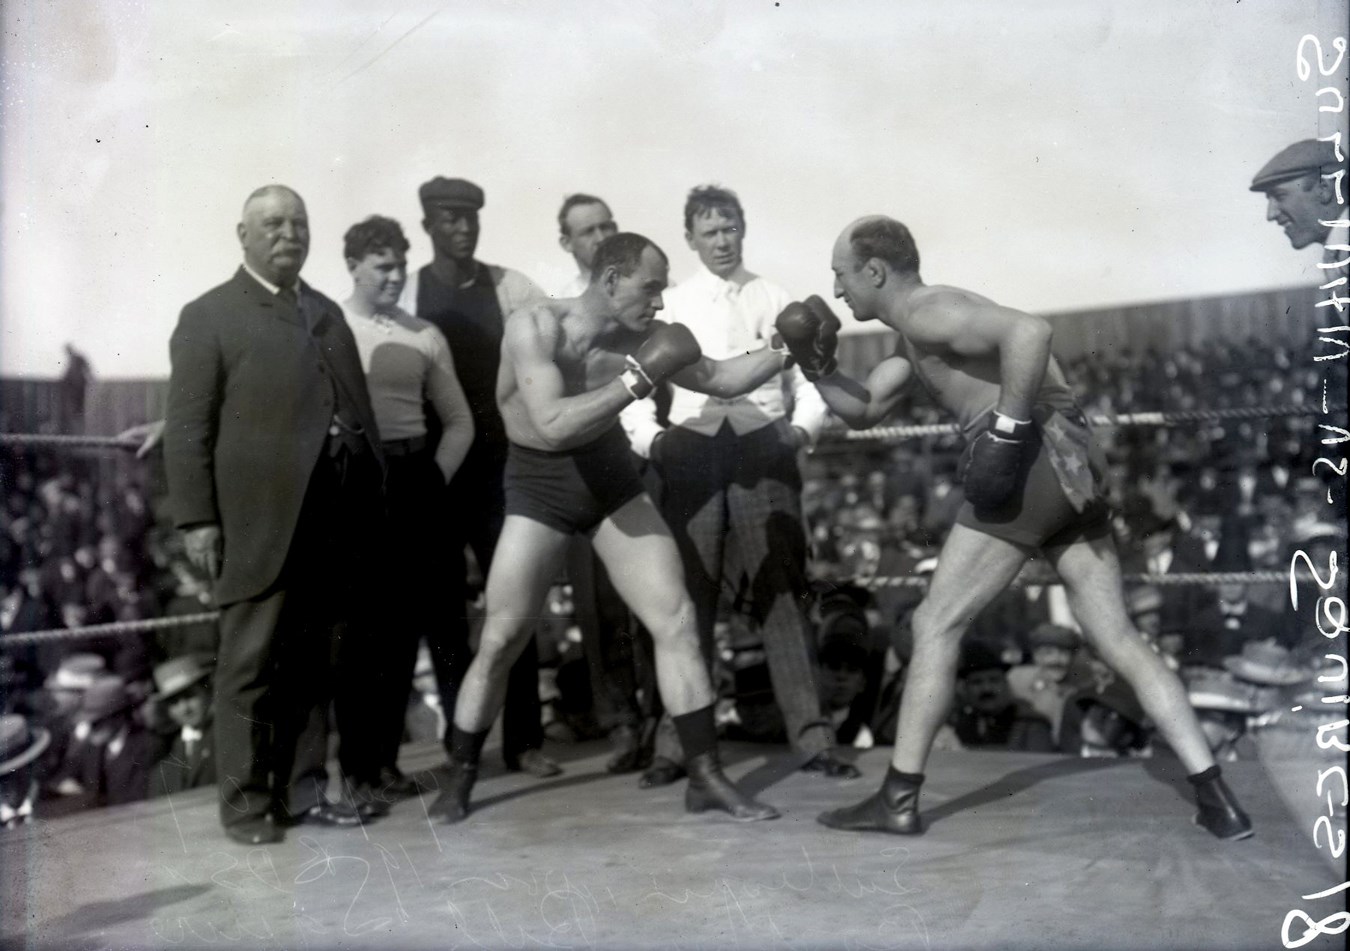 1907 Jack "Twin" Sullivan "Lights Out" for Bill Squires Type I Glass Plate Negative by Dana Studio